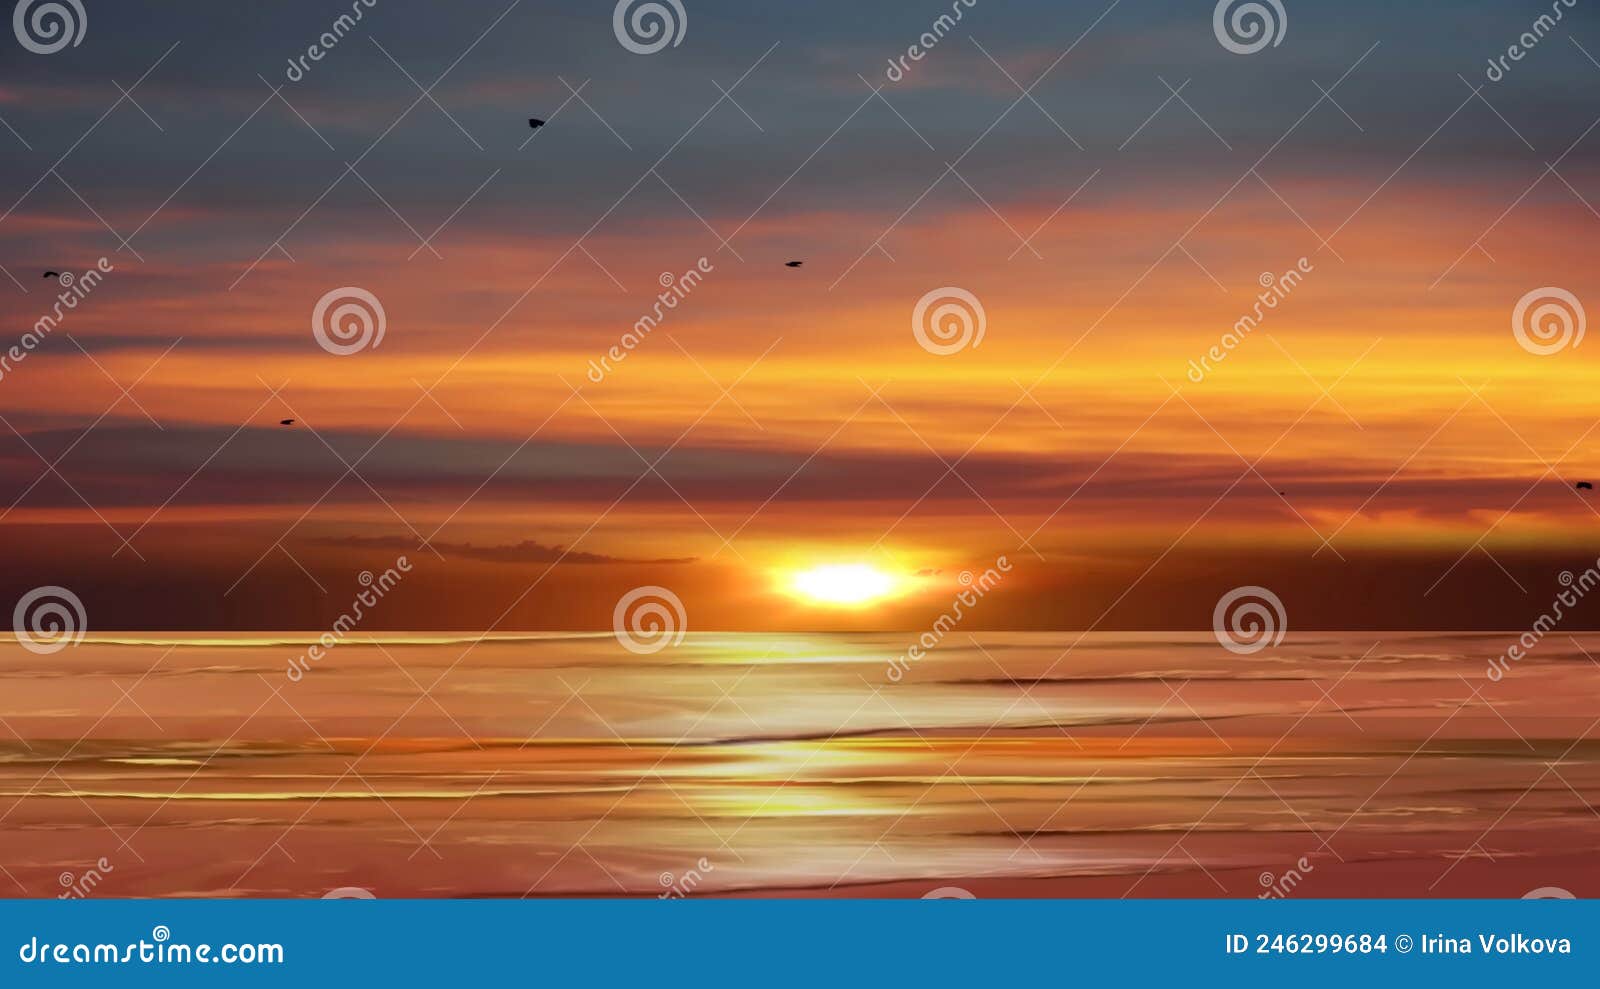 sunset at sea dramatic clouds  on sky pink orange yellow blue reflection on sea water  natire landscape